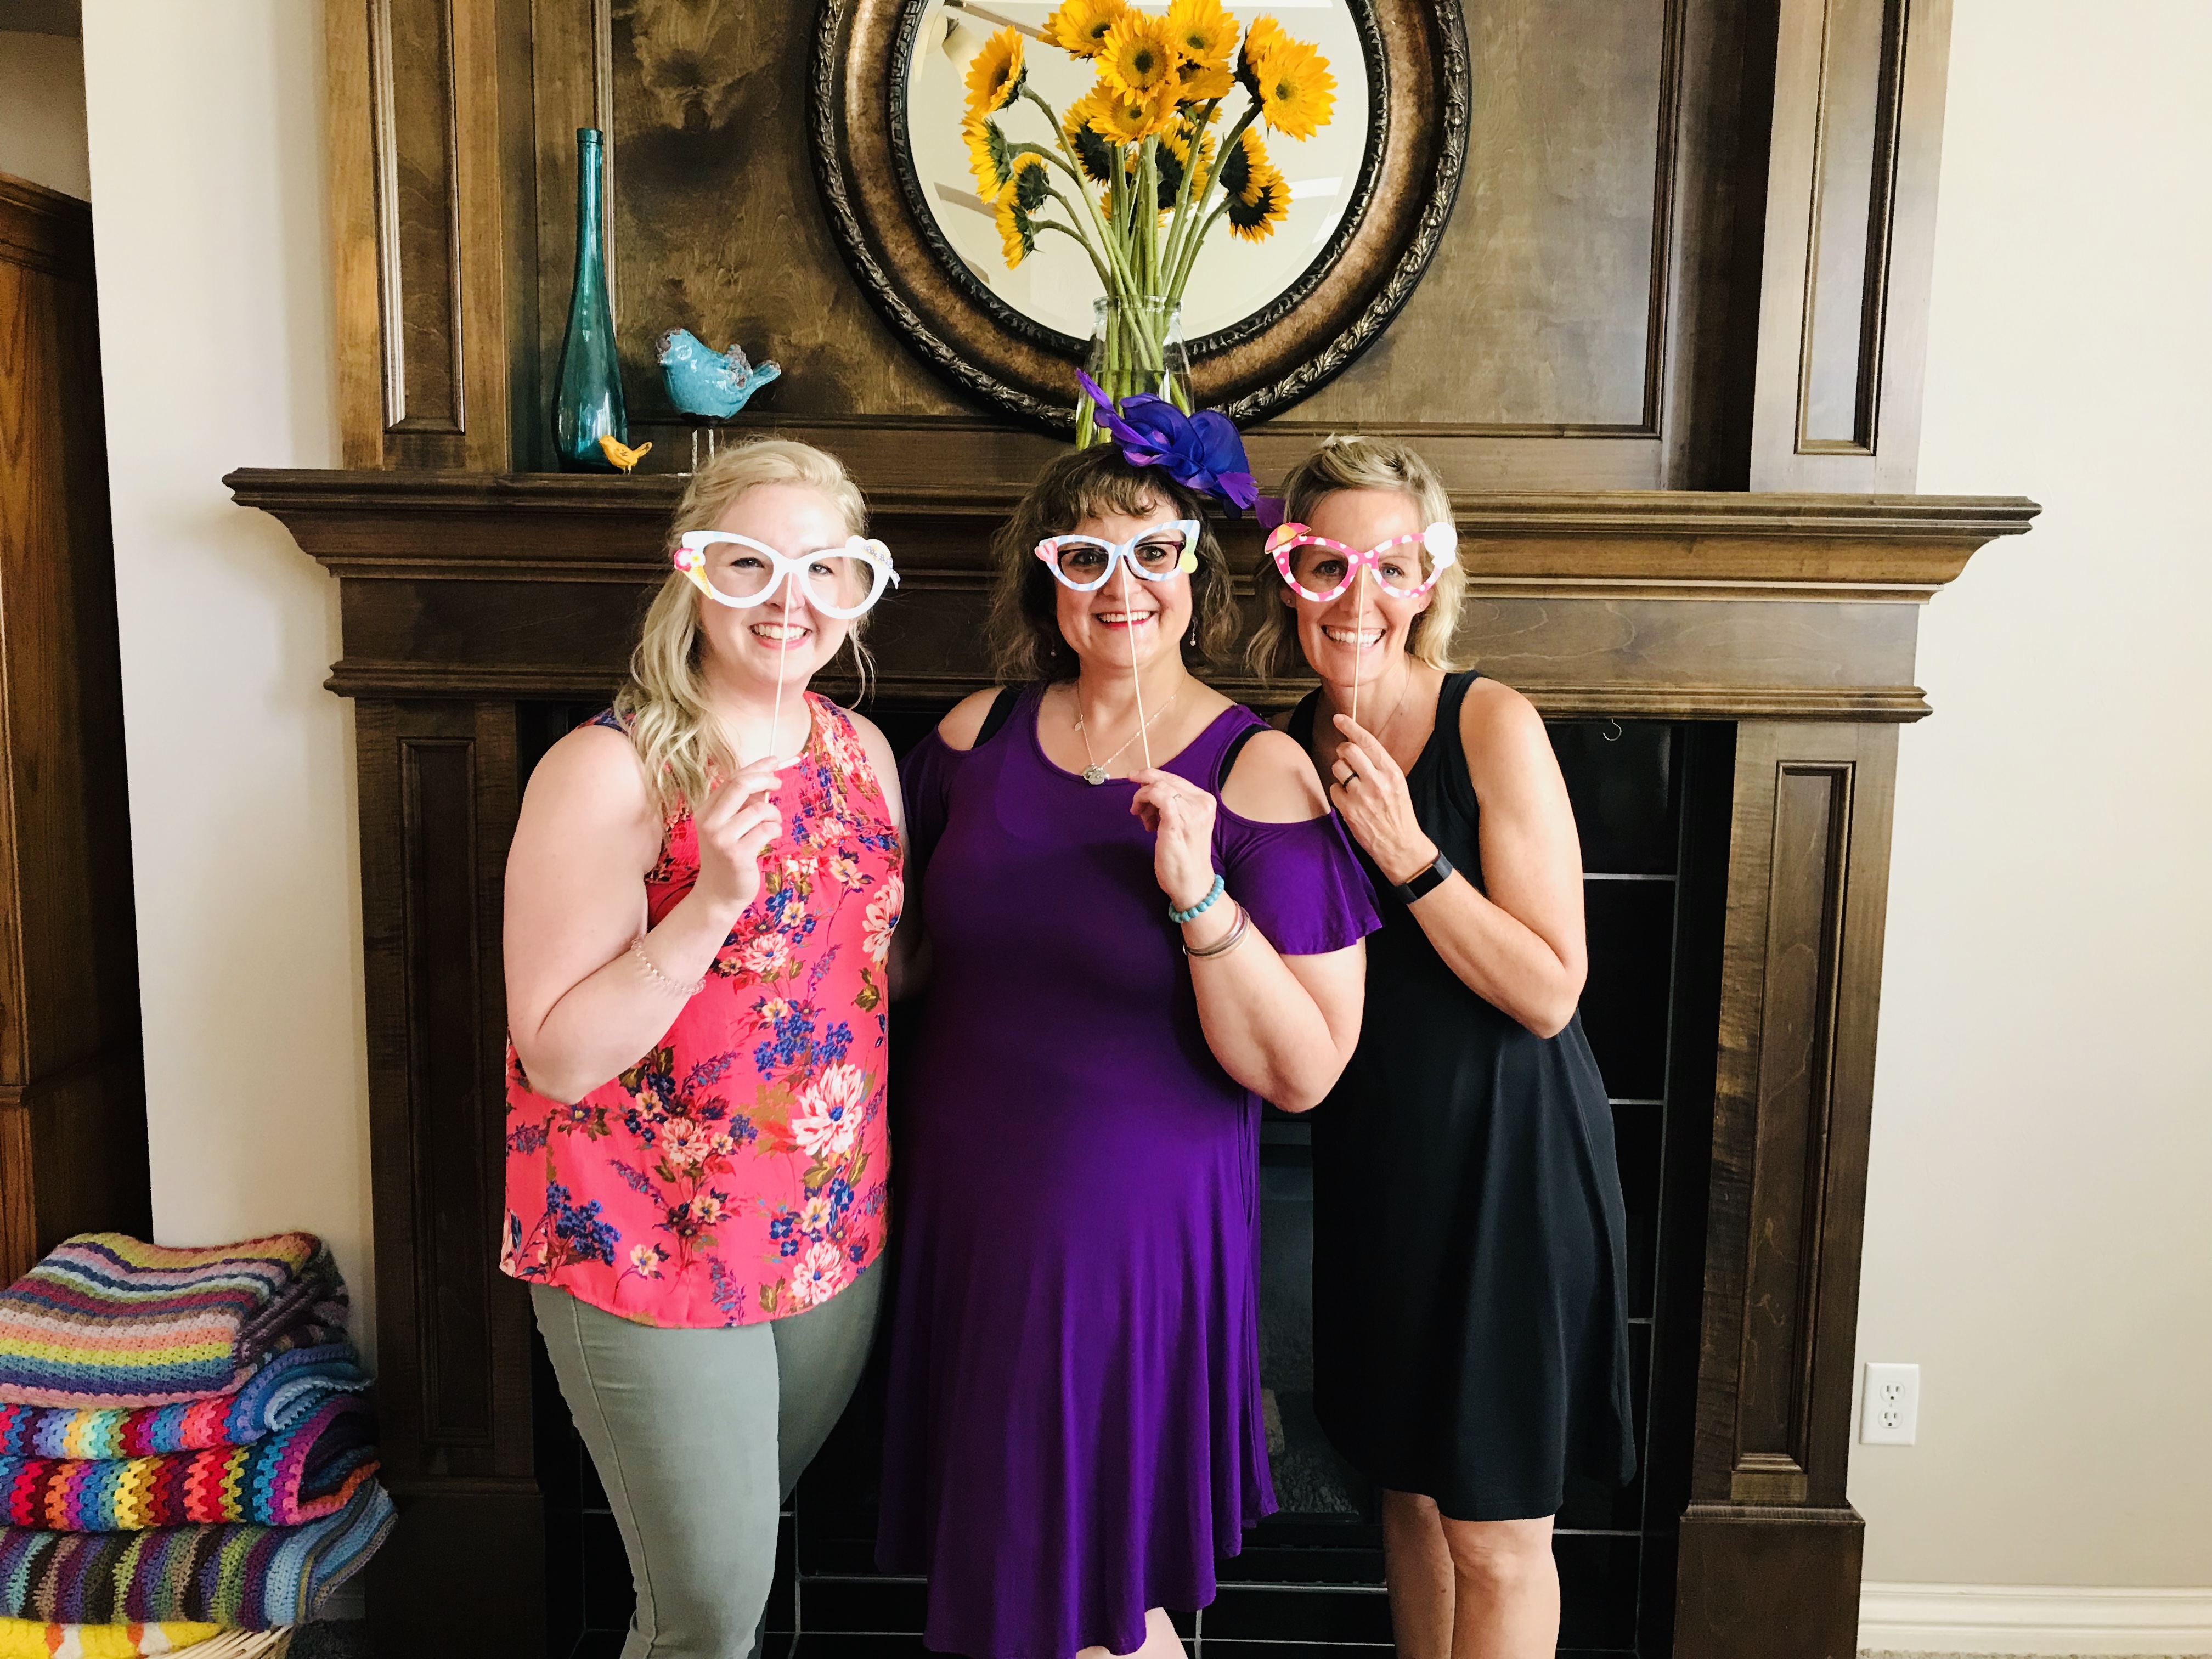 Plum Deluxe Tea Part Photo booth #partyideas